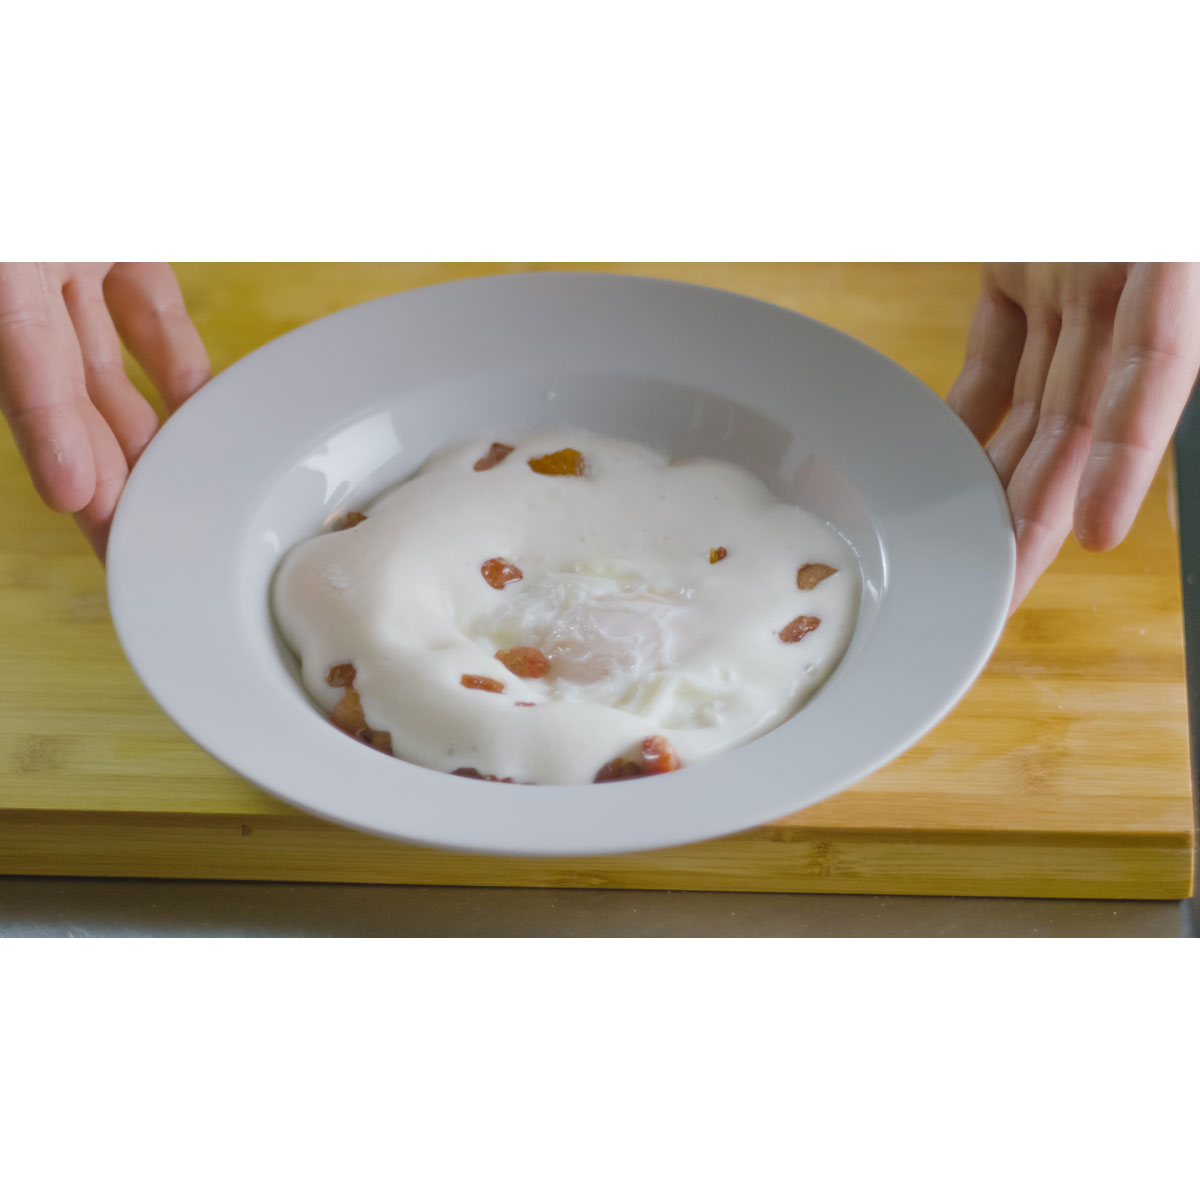 Poached eggs with Grana Padano mousse